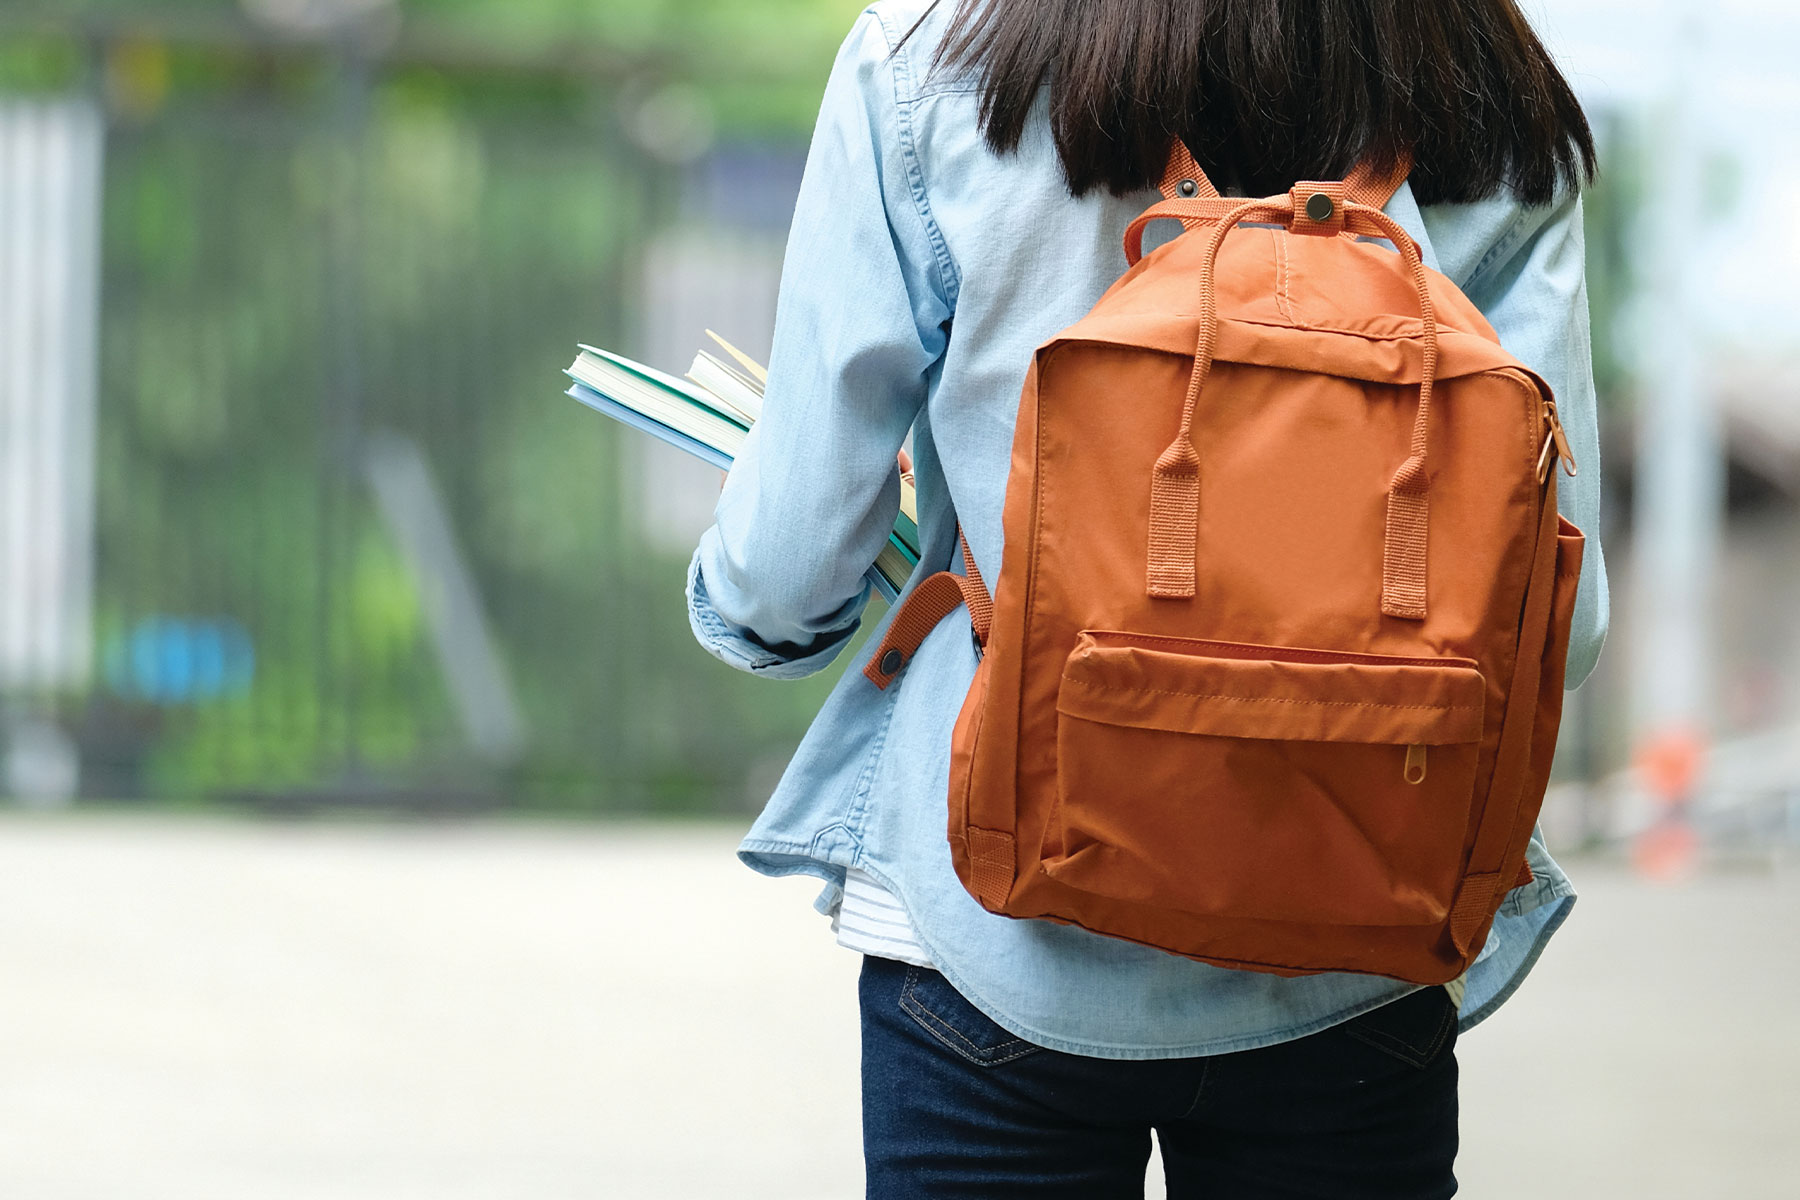 view of college student from behind, wearing backpack and holding books